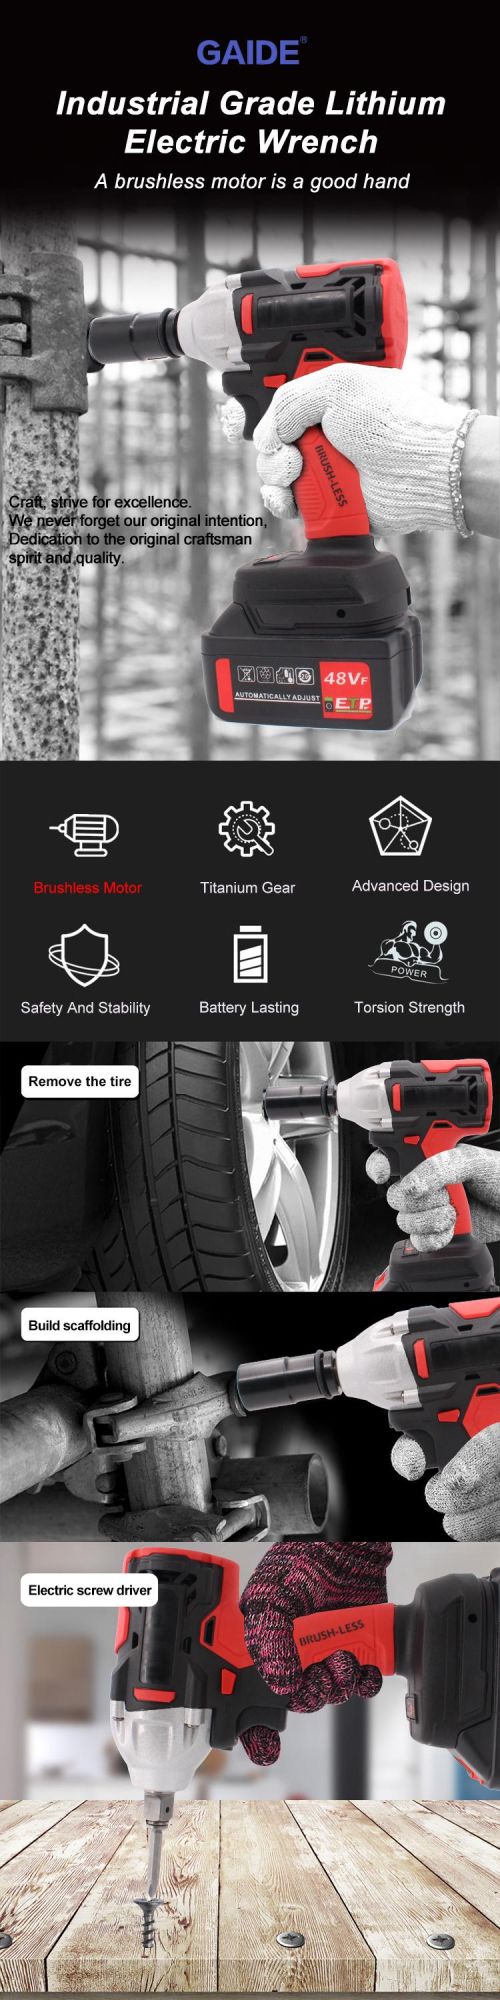 Gaide Top Supplier Brushless Cordless Electric Impact Wrench